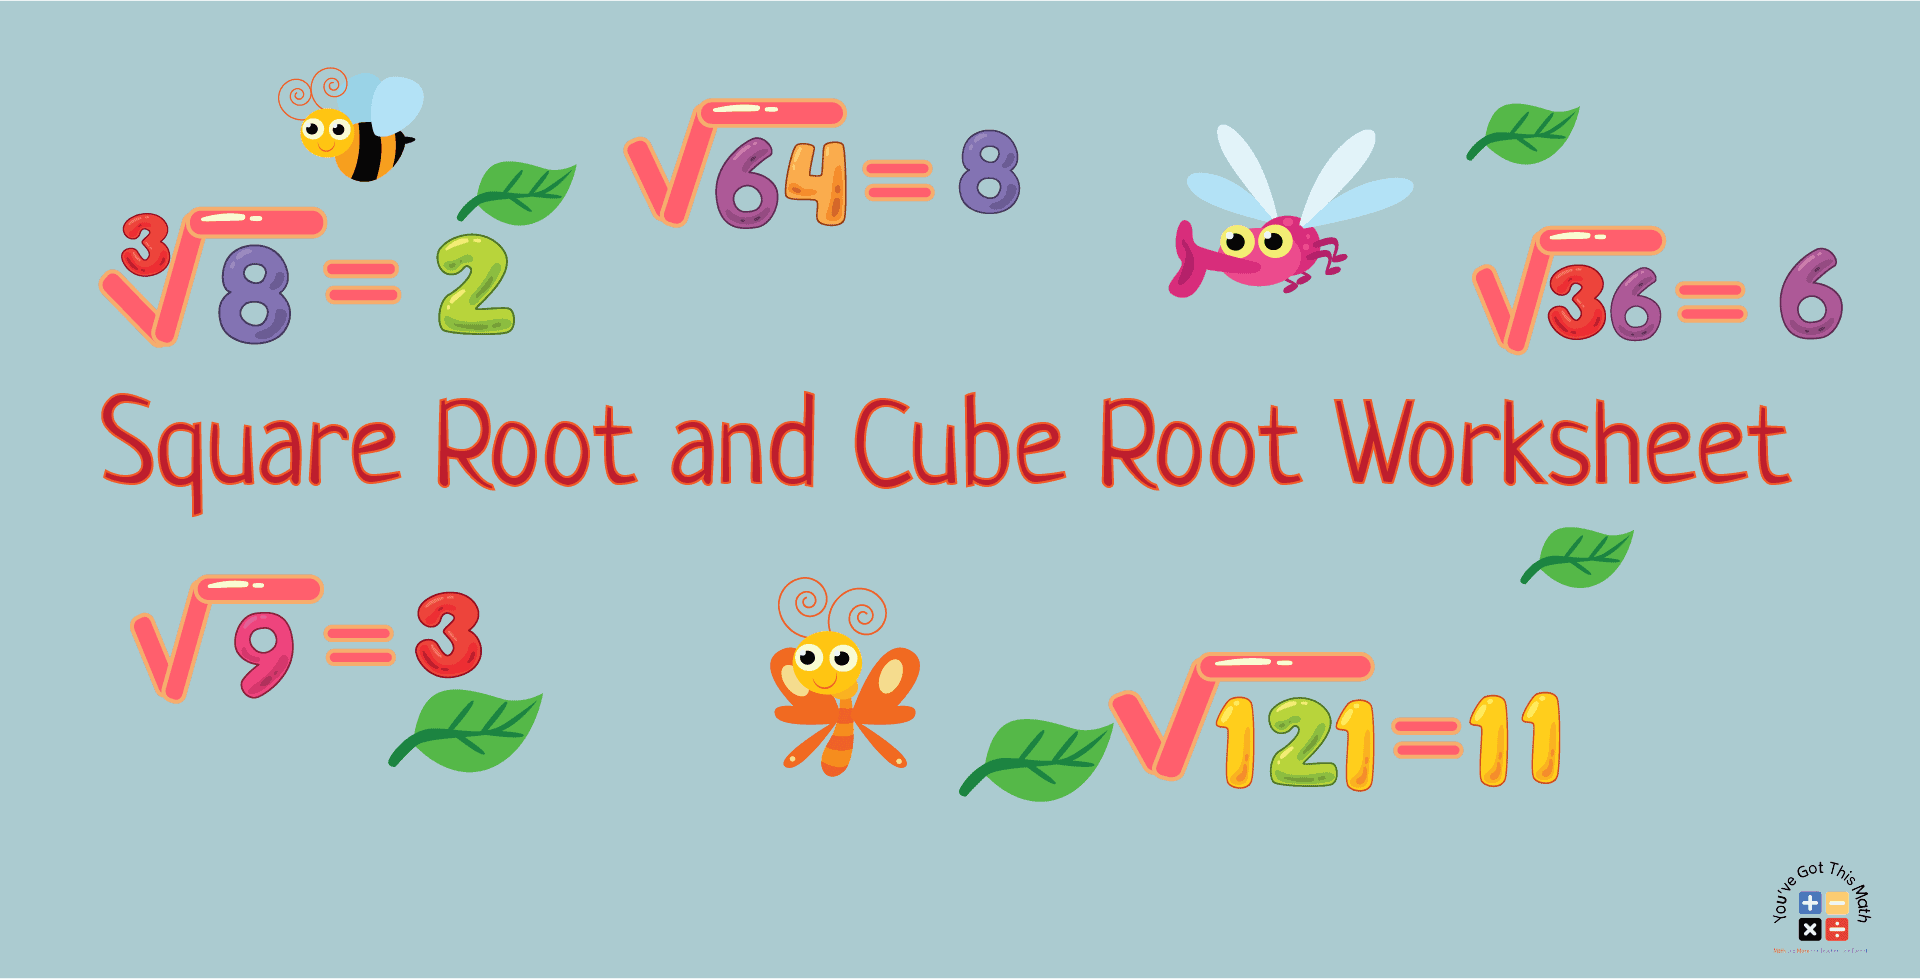 Square Root and Cube Root Worksheet